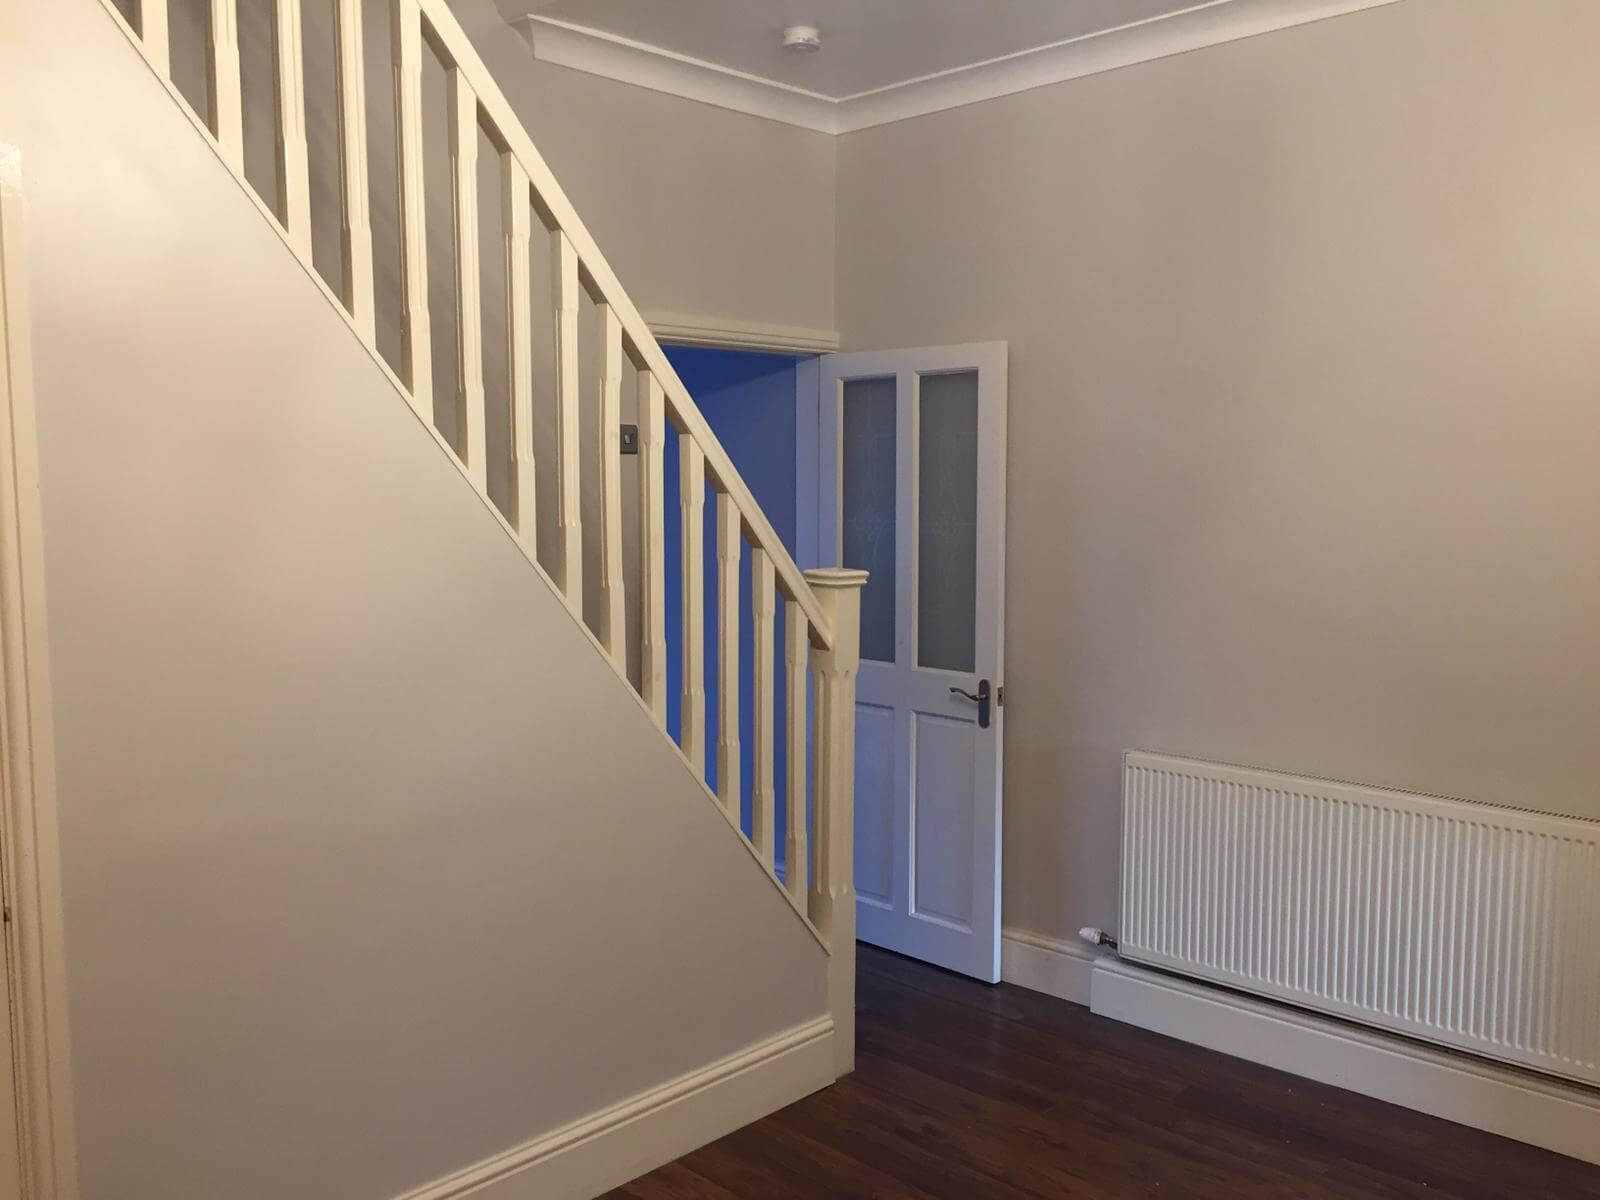 Painitng and Decorating Stockport